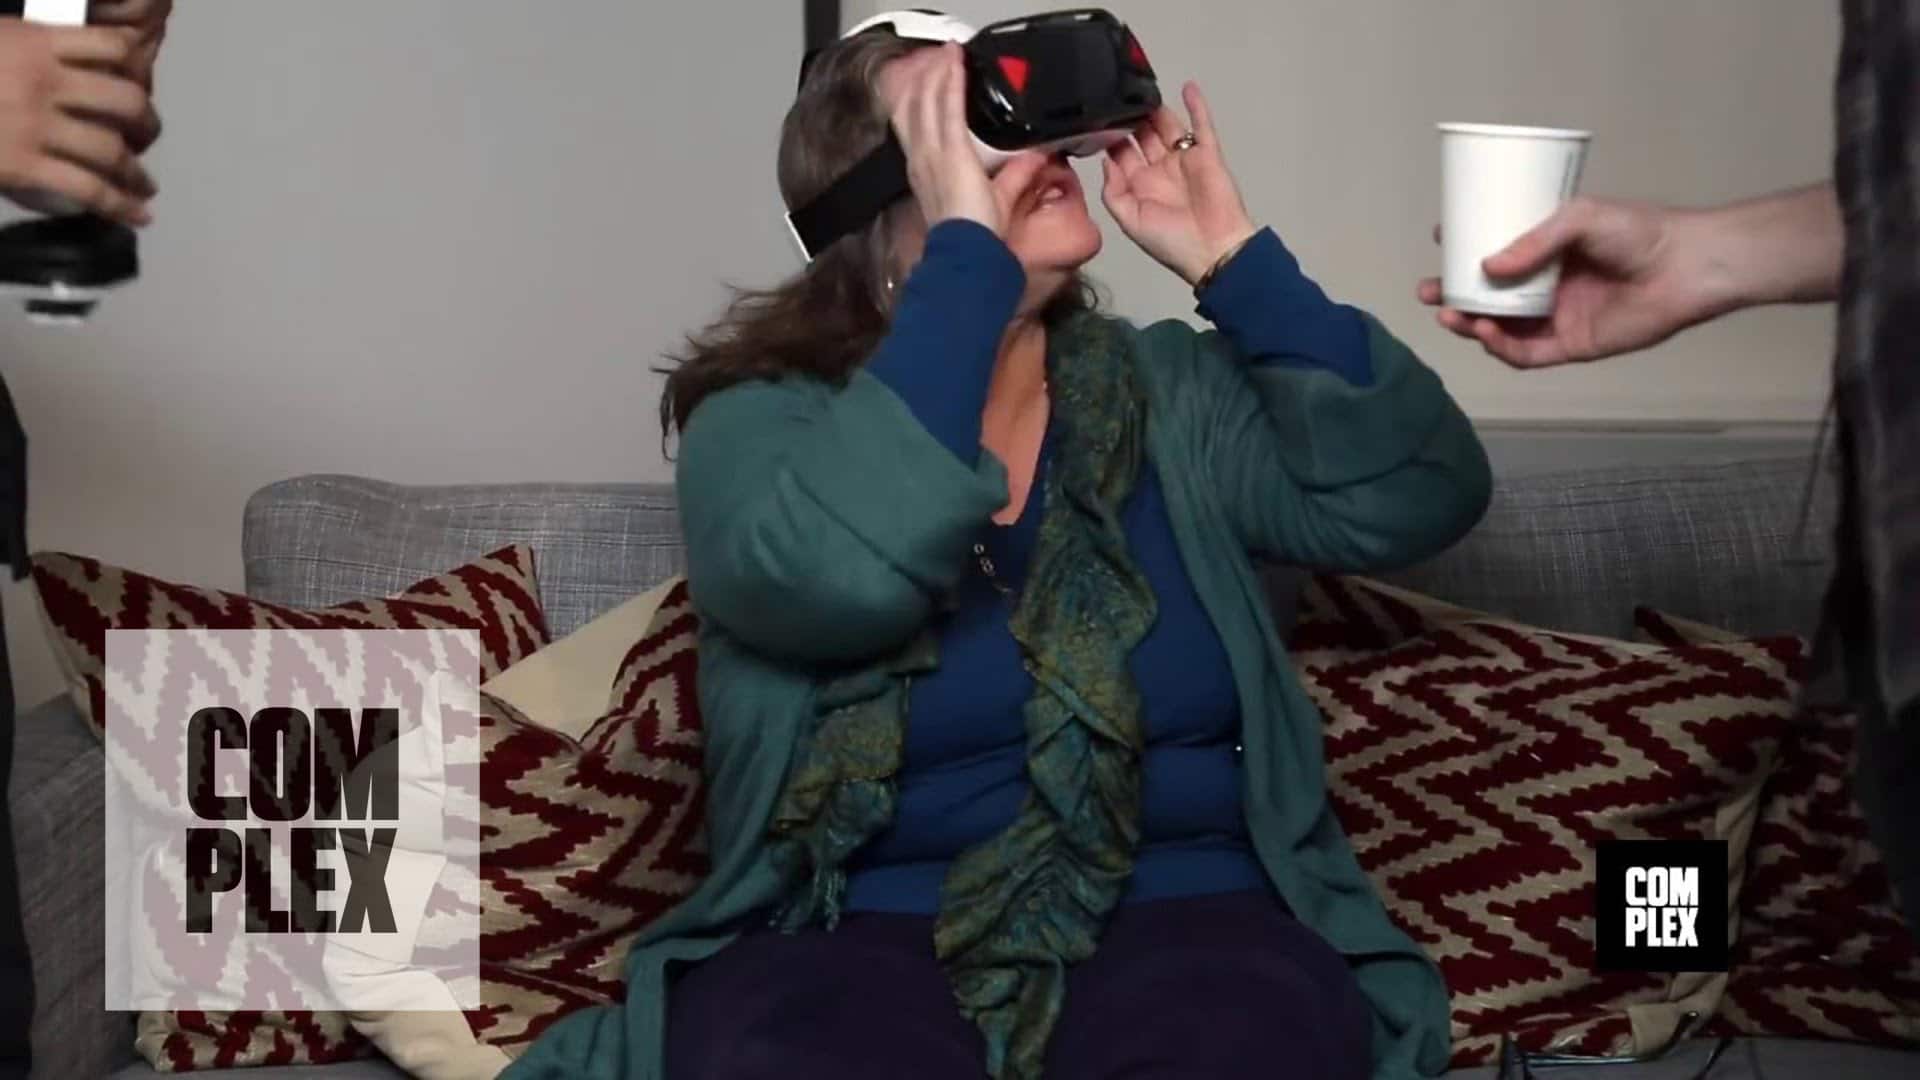 VR Porn Reactions on Oculus From Old People